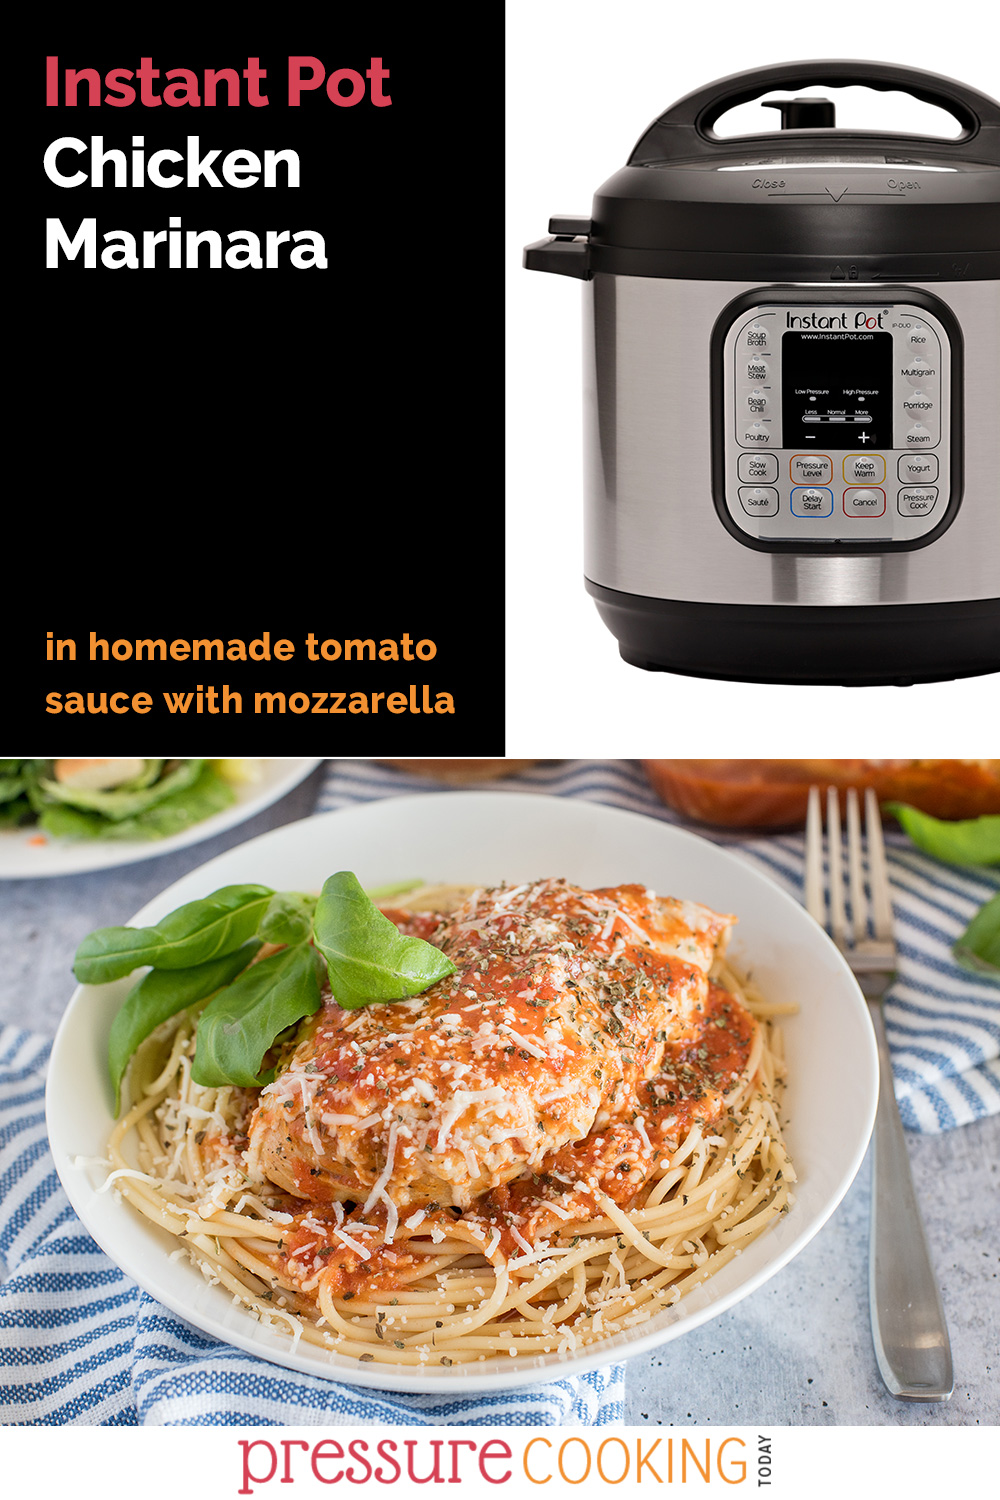 Homemade tomato sauce + melty mozzarella + quick chicken dinner = THIS WEEK'S DINNER! Instructions to melt cheese with an air fryer lid or in the oven. via @PressureCook2da